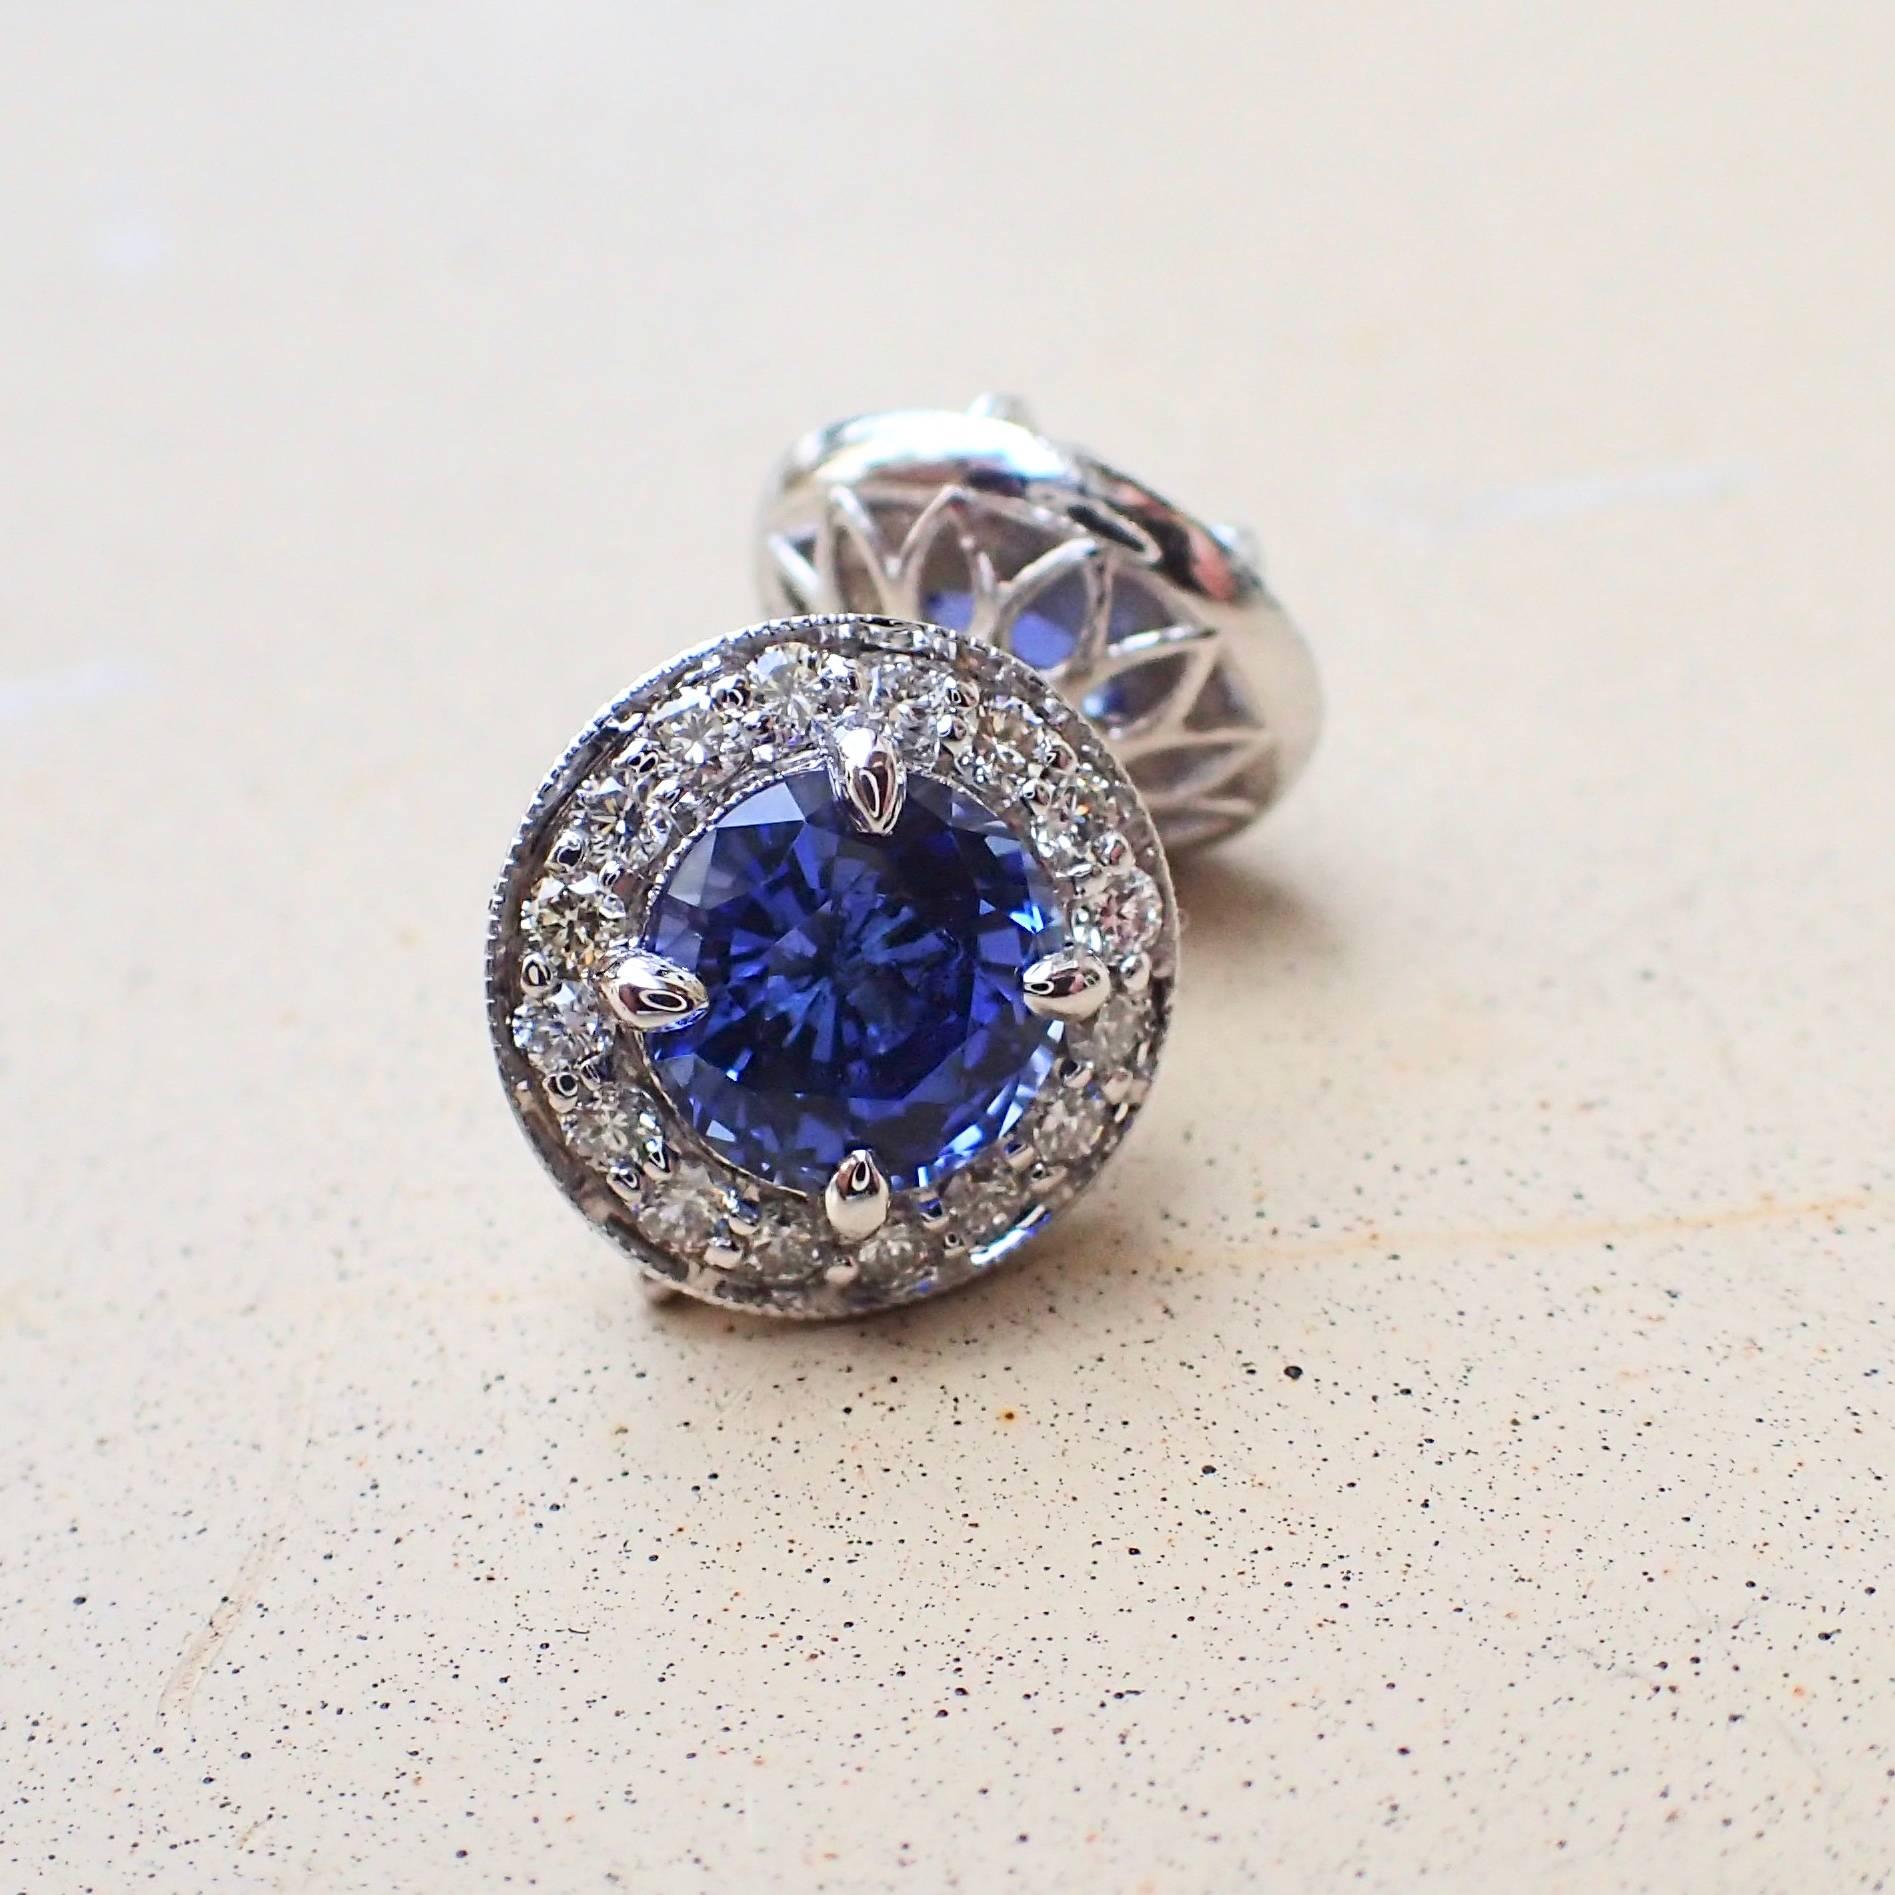 A pair of 18k white gold earrings are set with two (2) Round Brilliant Cut Chatham-Created Blue Sapphire that measure 6.0mm x 6.0mm and weigh a total of 2.21 carats with Clarity Grade VVS-VS and thirty-two (32) Round Brilliant Cut Diamonds that